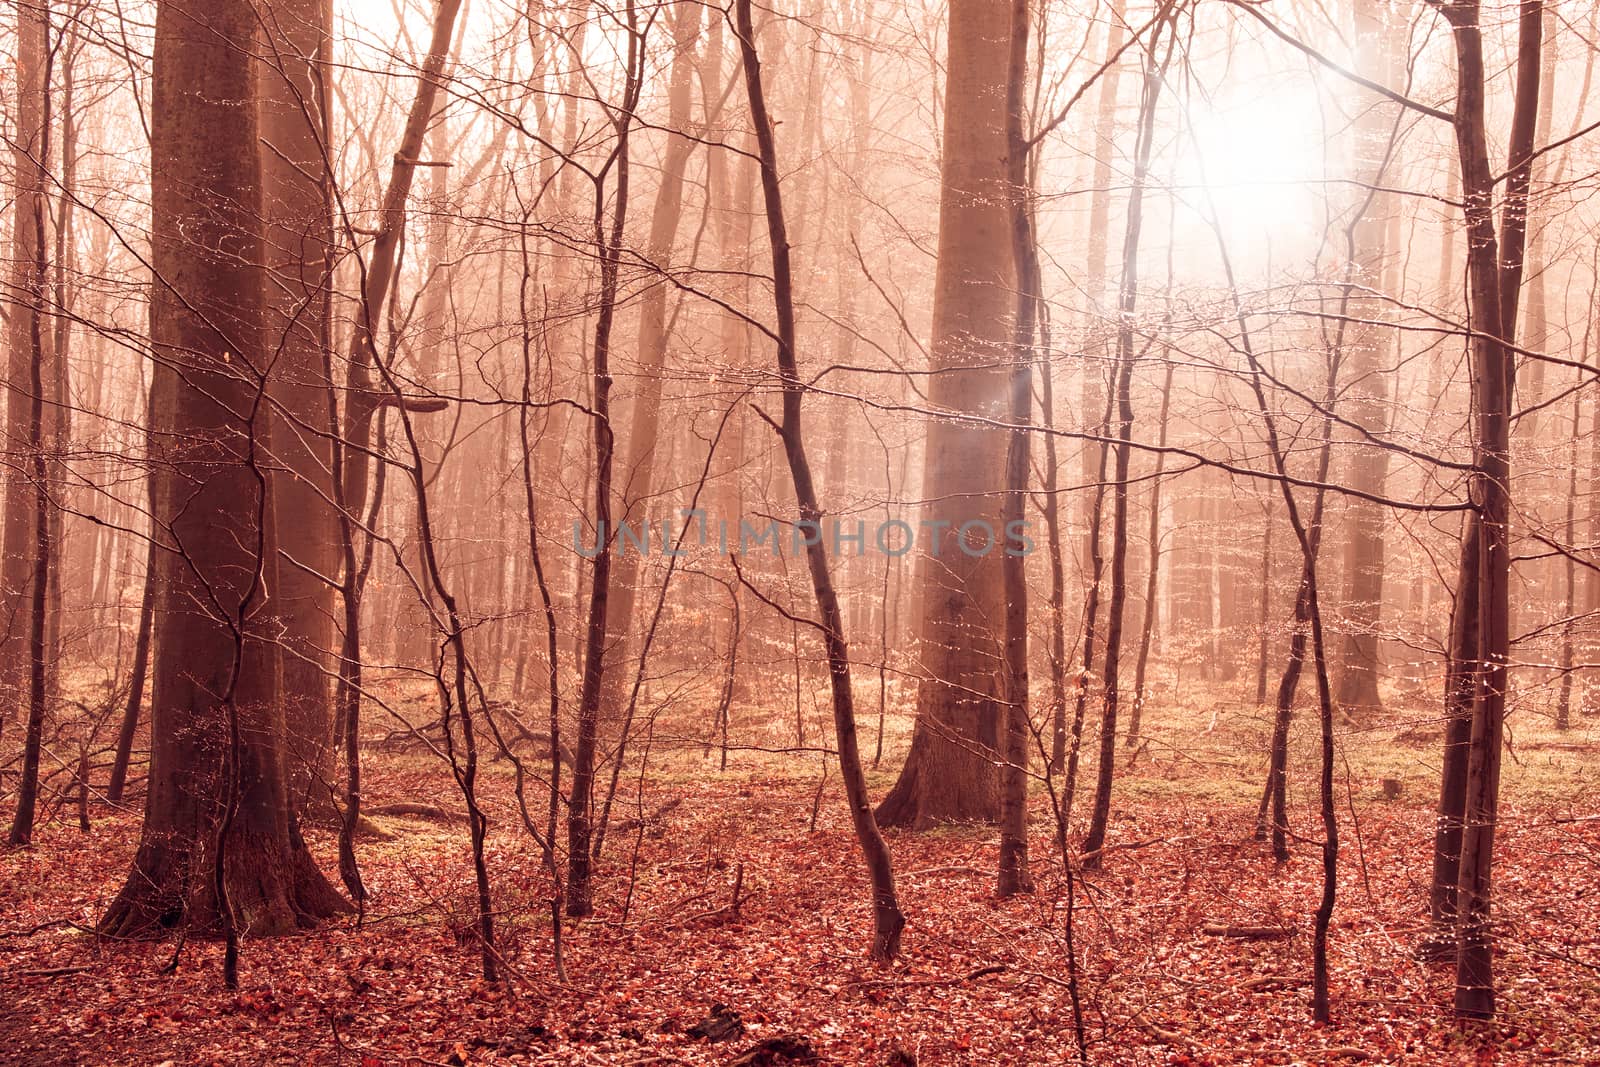 Misty forest foliage in warm colors by Sportactive